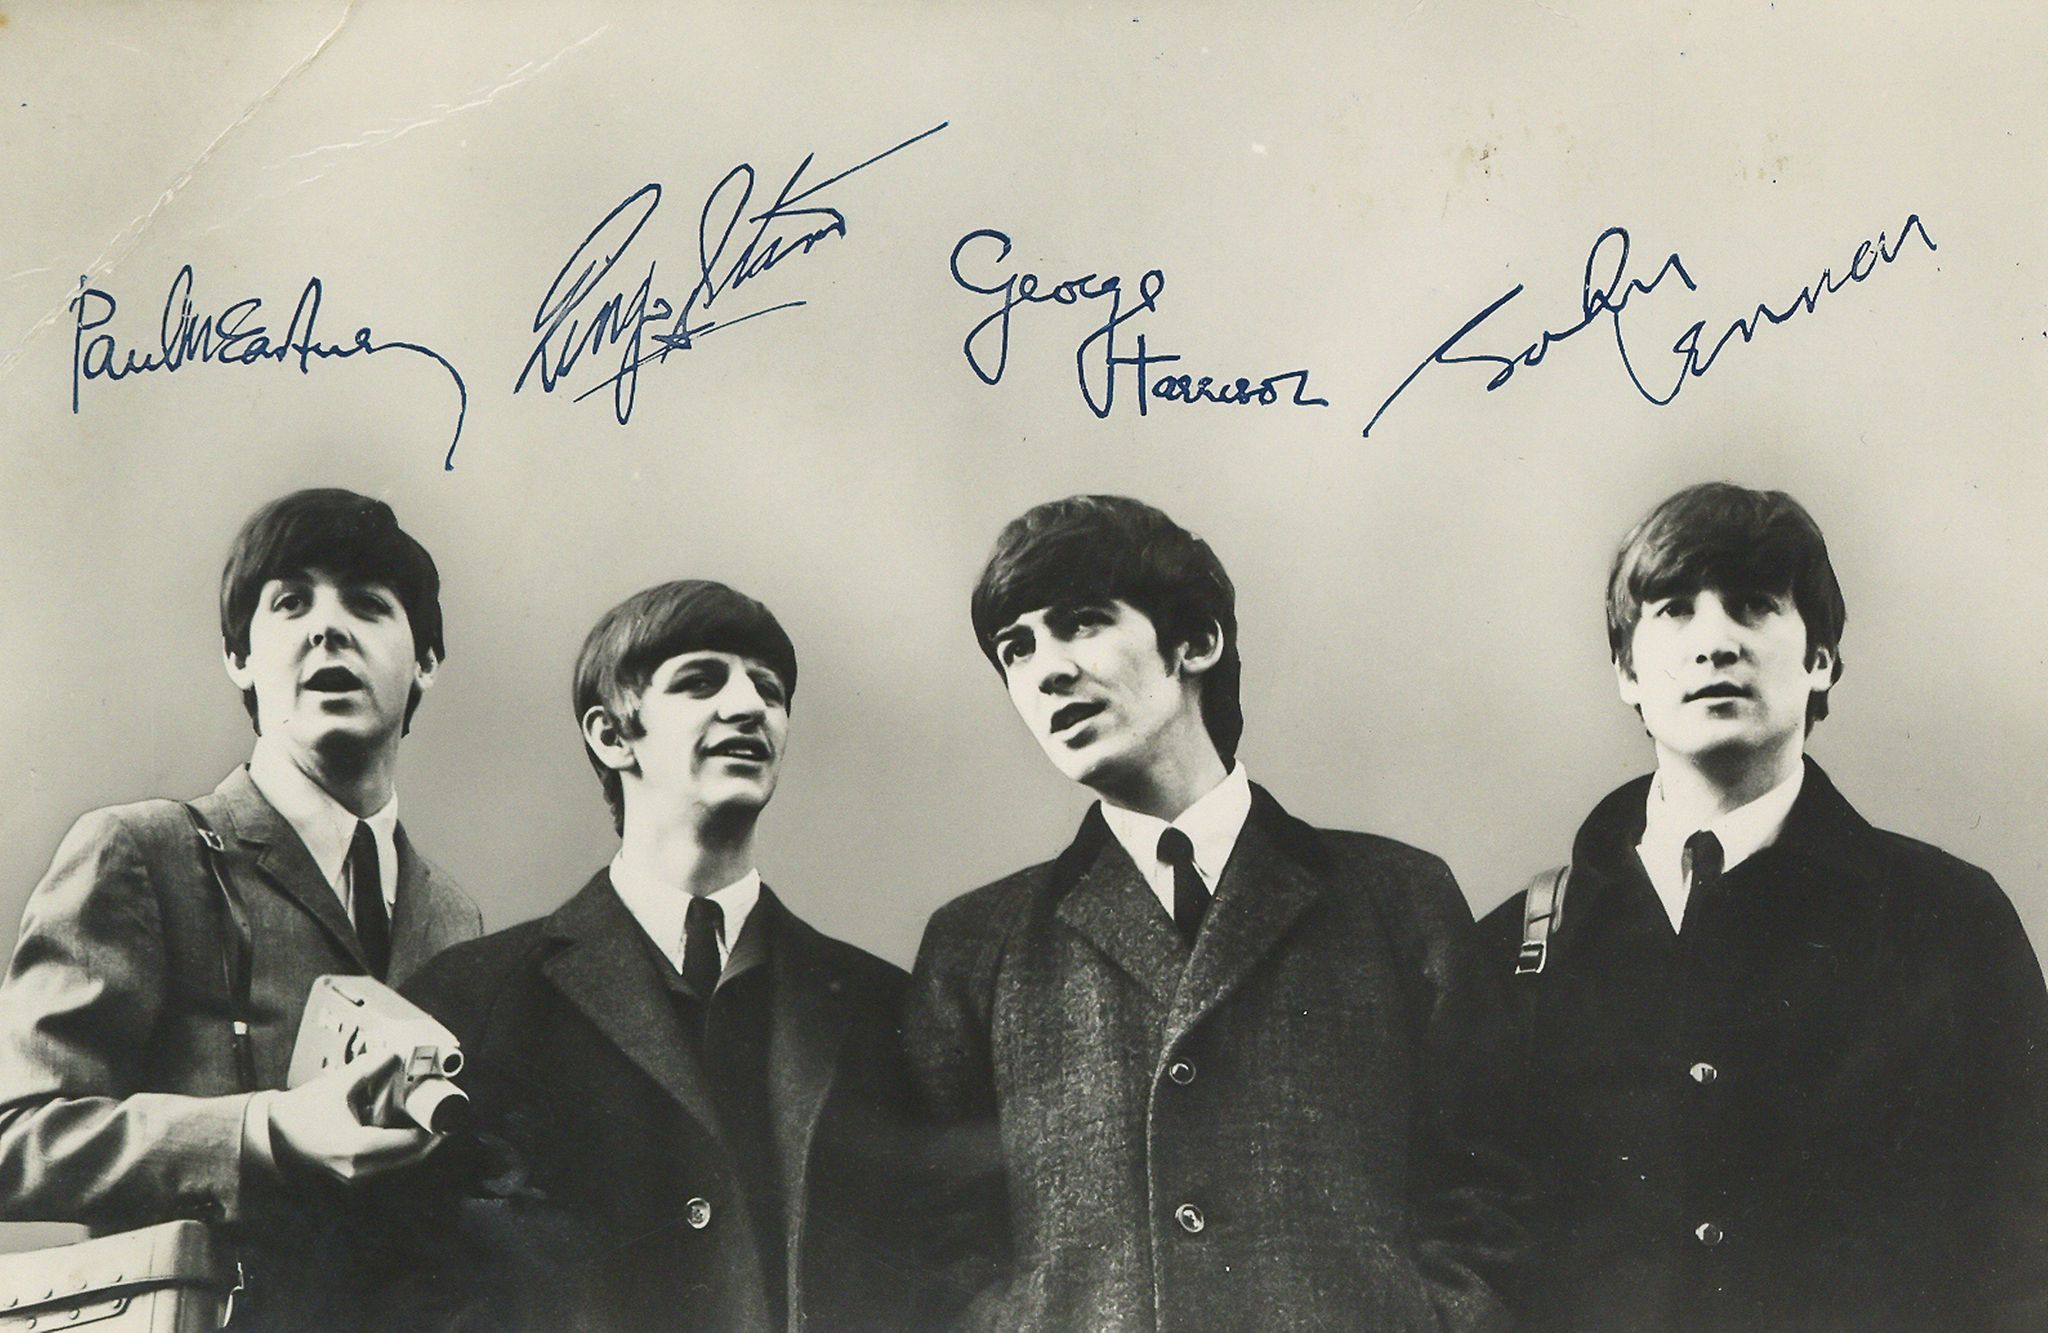 BEATLES, THE - A complete set of signatures by George Harrison, Paul McCartney A complete set of - Image 2 of 2